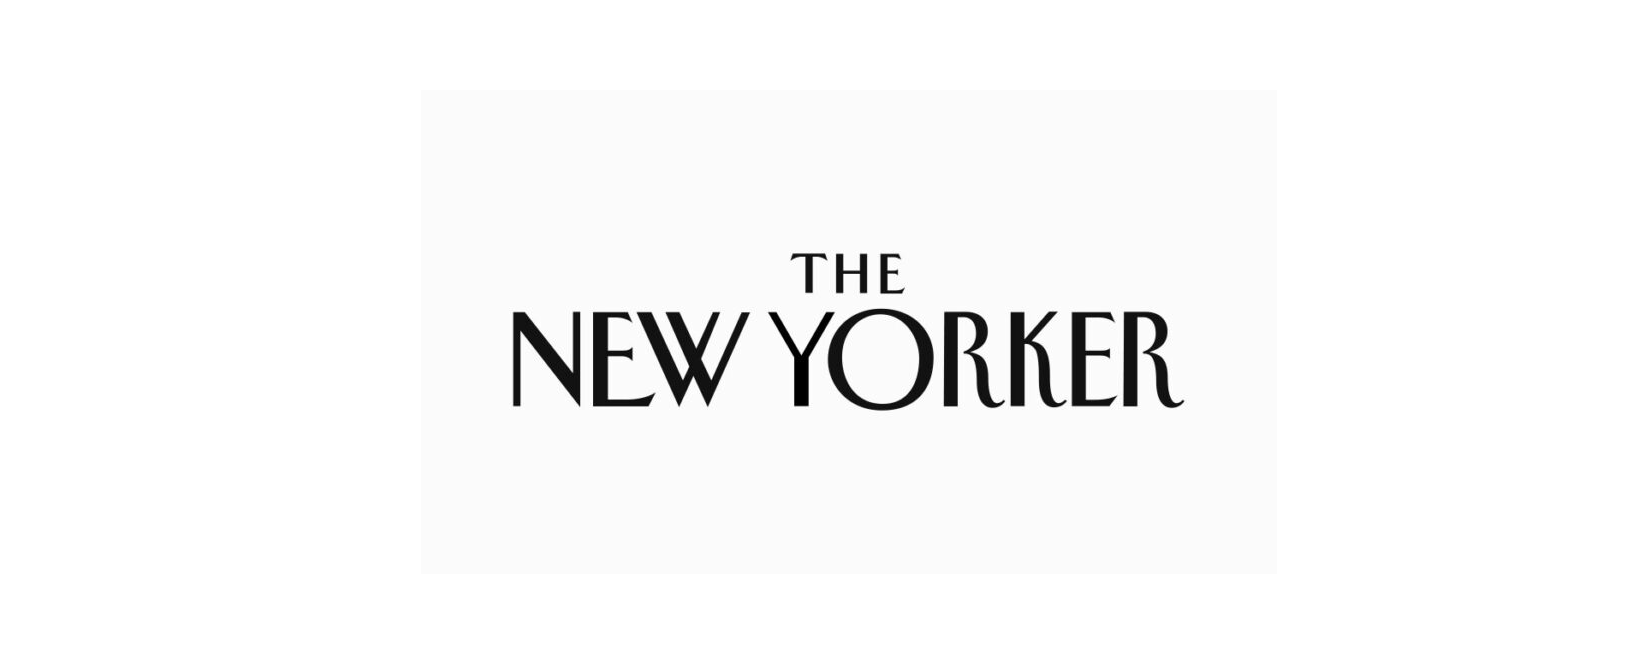 The New Yorker Discount Code 2022